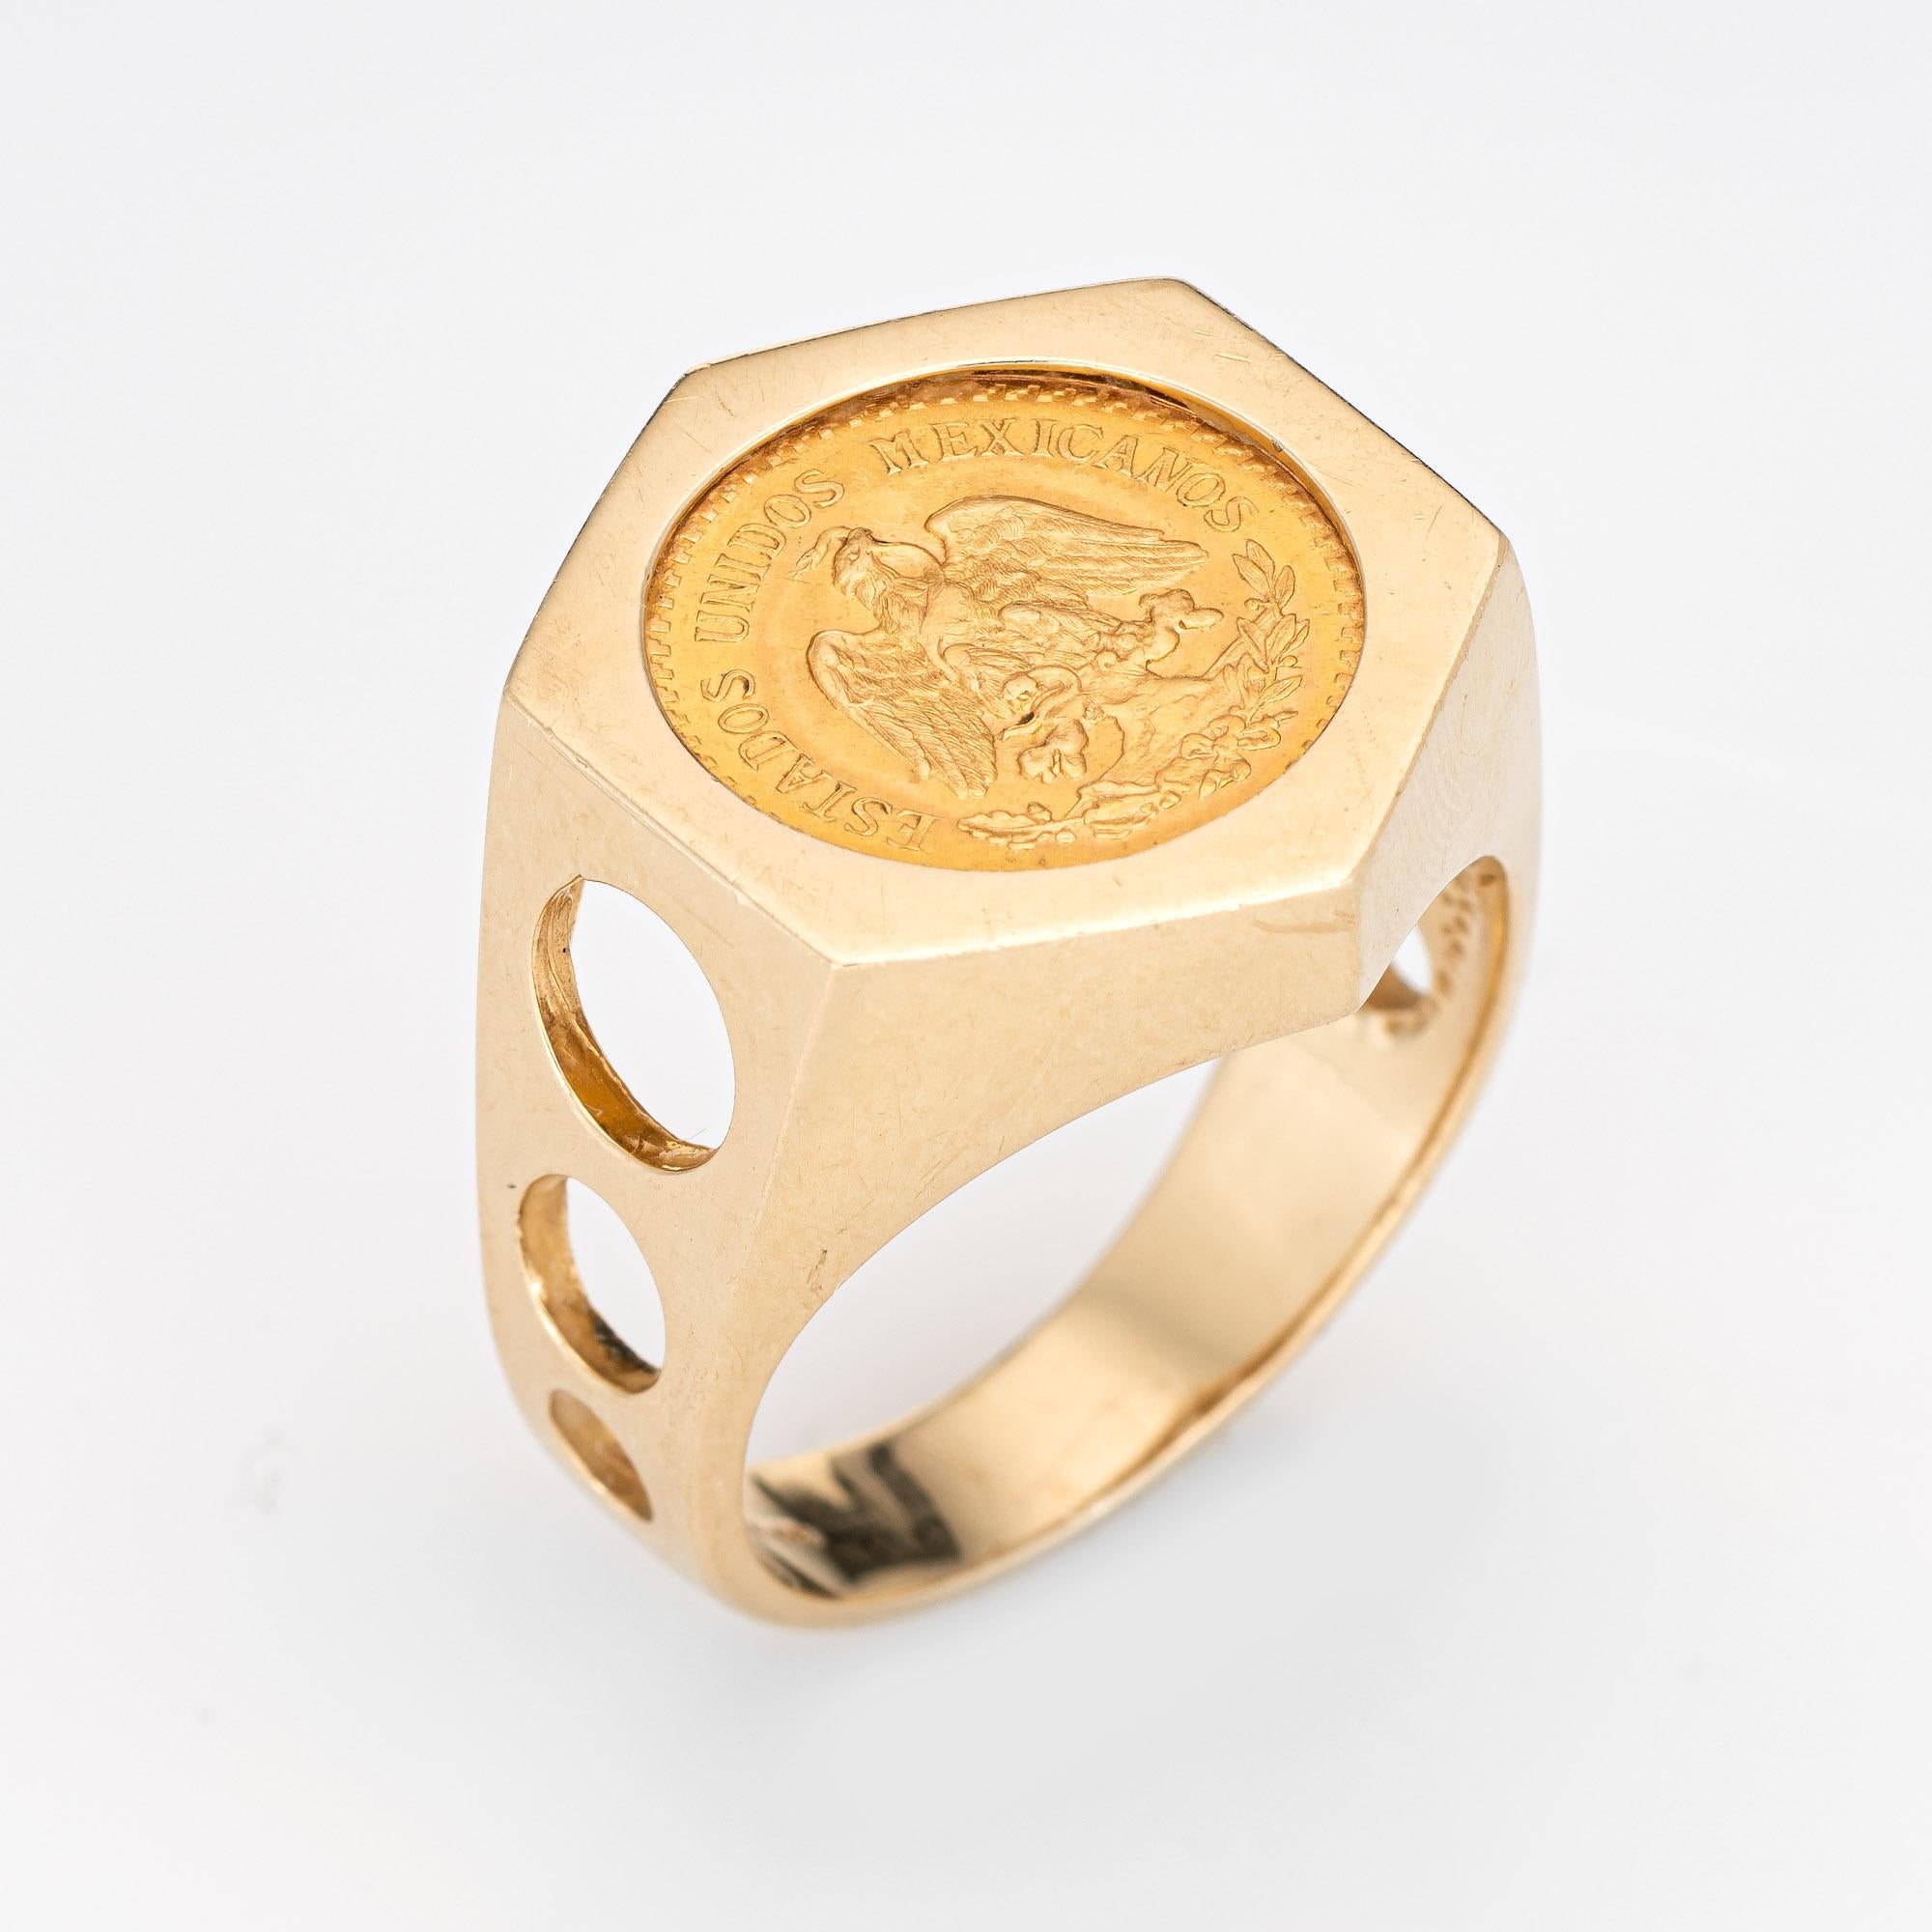 Stylish vintage Dos Pesos 1945 coin ring (circa 1970s) crafted in 14 karat yellow gold. 

The Dos Pesos coin is set into a stylish hexagonal mount. The medium rise ring (5mm - 0.19 inches) sits comfortably on the finger. The 1945 2.50 Dos Y Medio